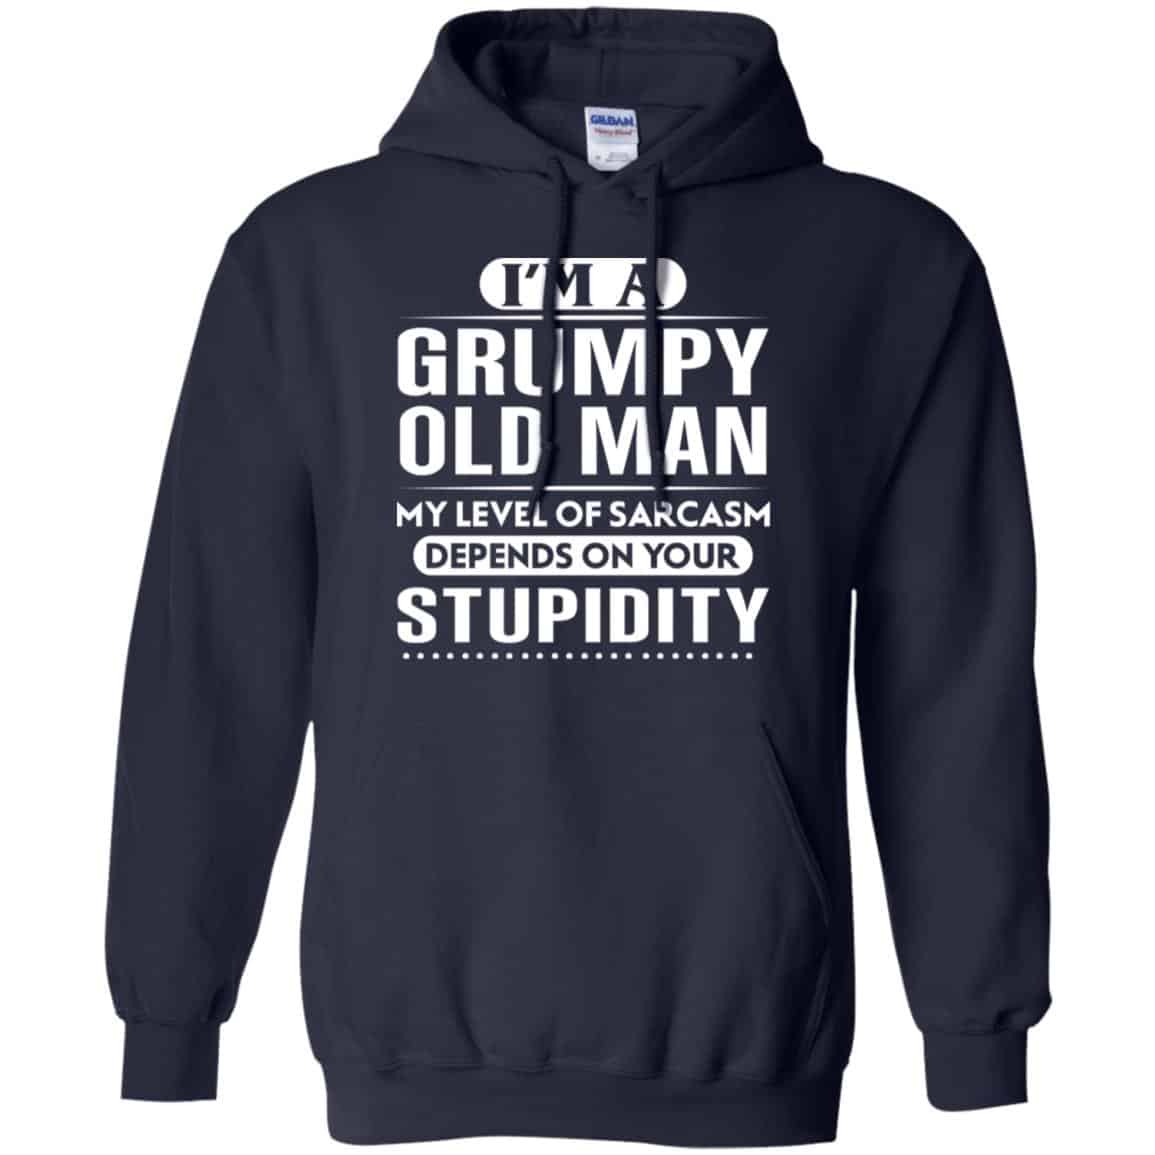 I'm A Grumpy Old Man My Level Of Sarcasm Depends On Your Stupidity ...